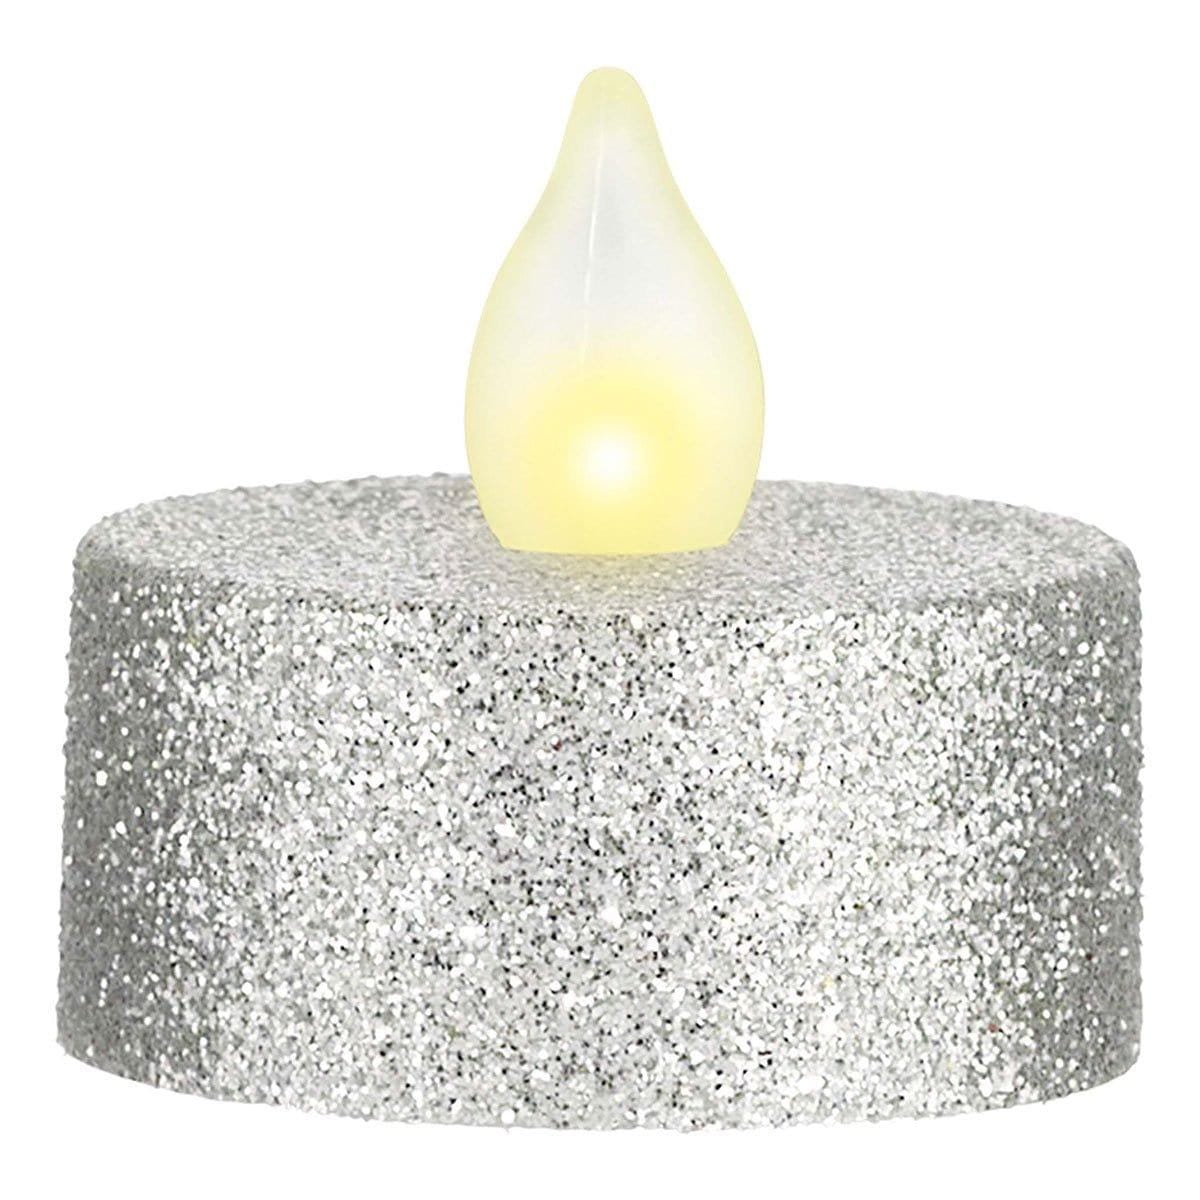 Buy Decorations LED Tealights 10/pkg - Silver sold at Party Expert